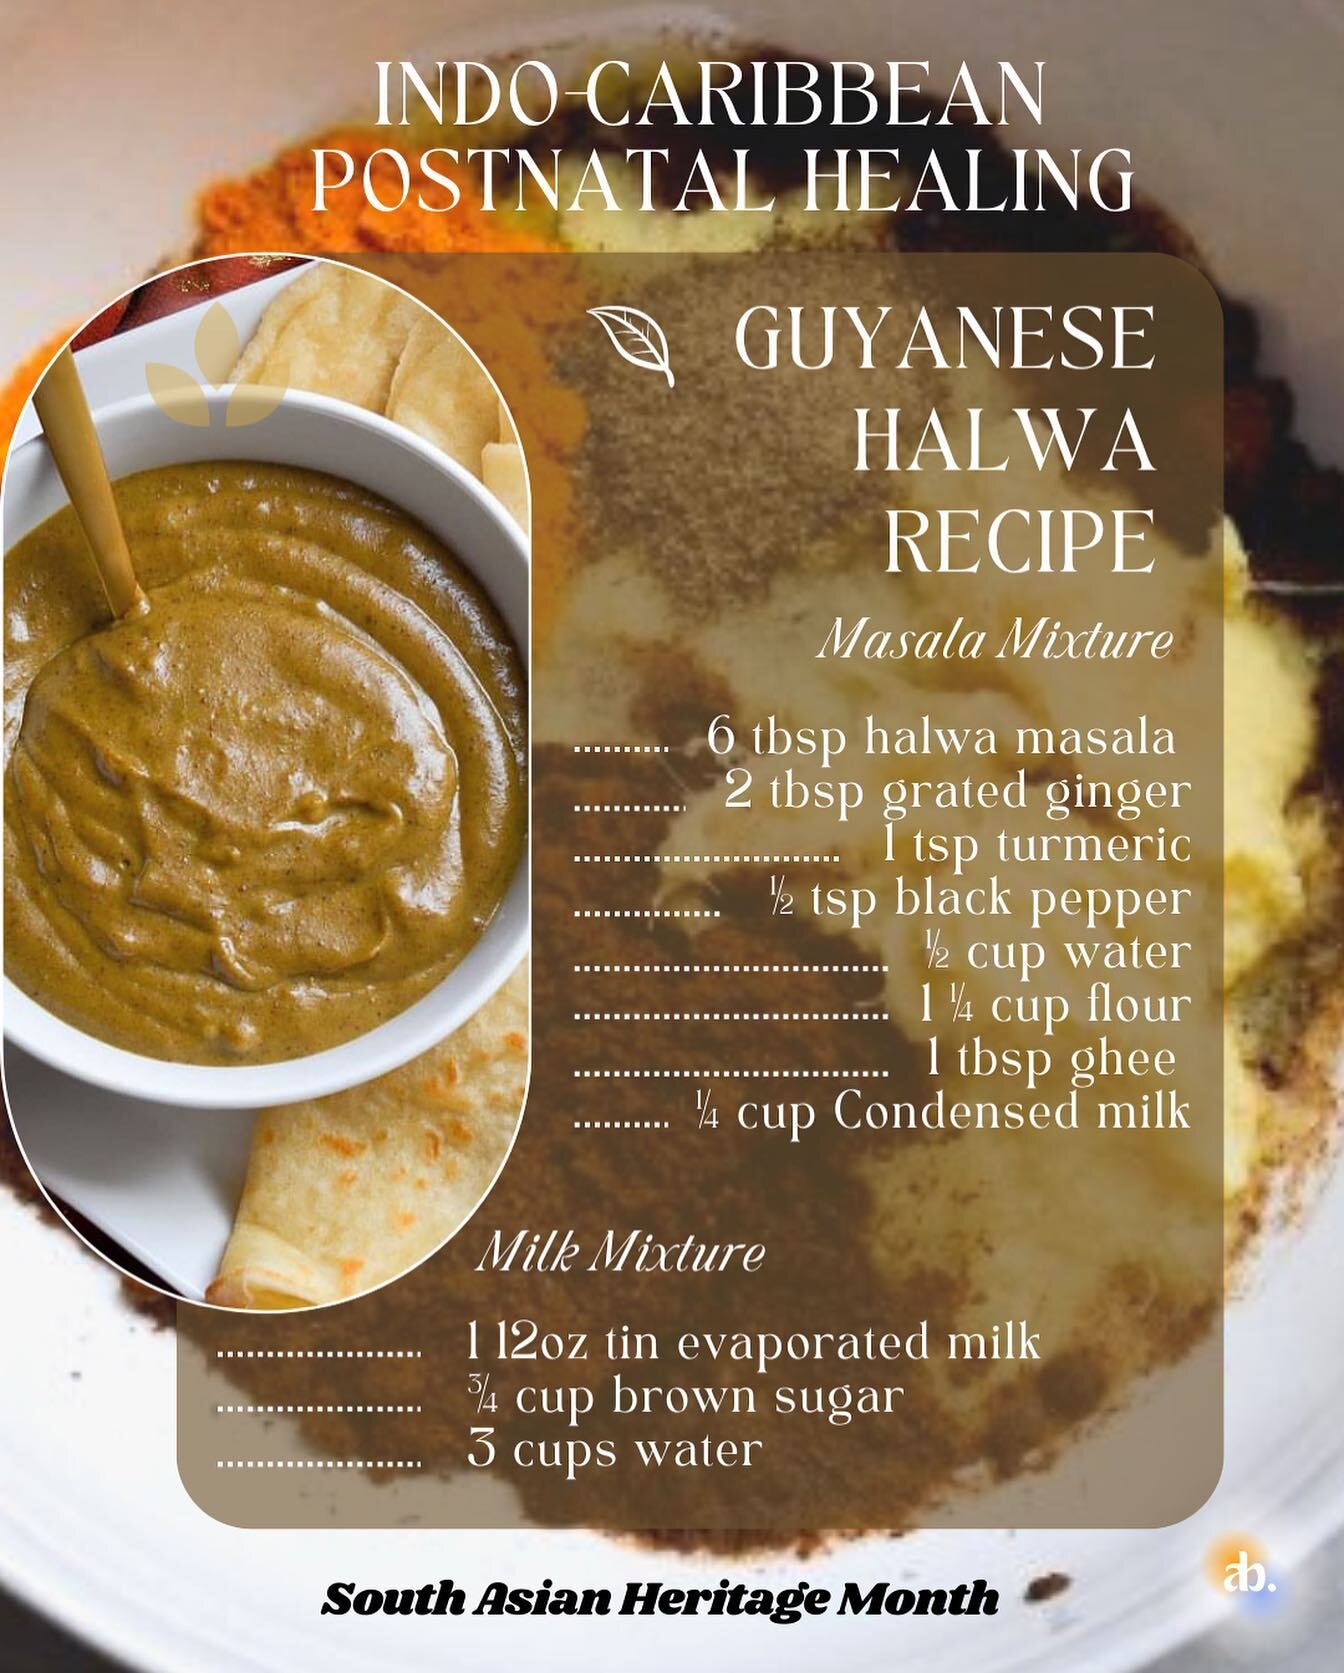 Postnatal recipes connect us to our ancestors who understand our pain and what we need to heal. Some cultures feed those who have just given birth specific foods to heal the body and promote lactation.

In some Indo-Caribbean cultures,&nbsp;Halwa is 